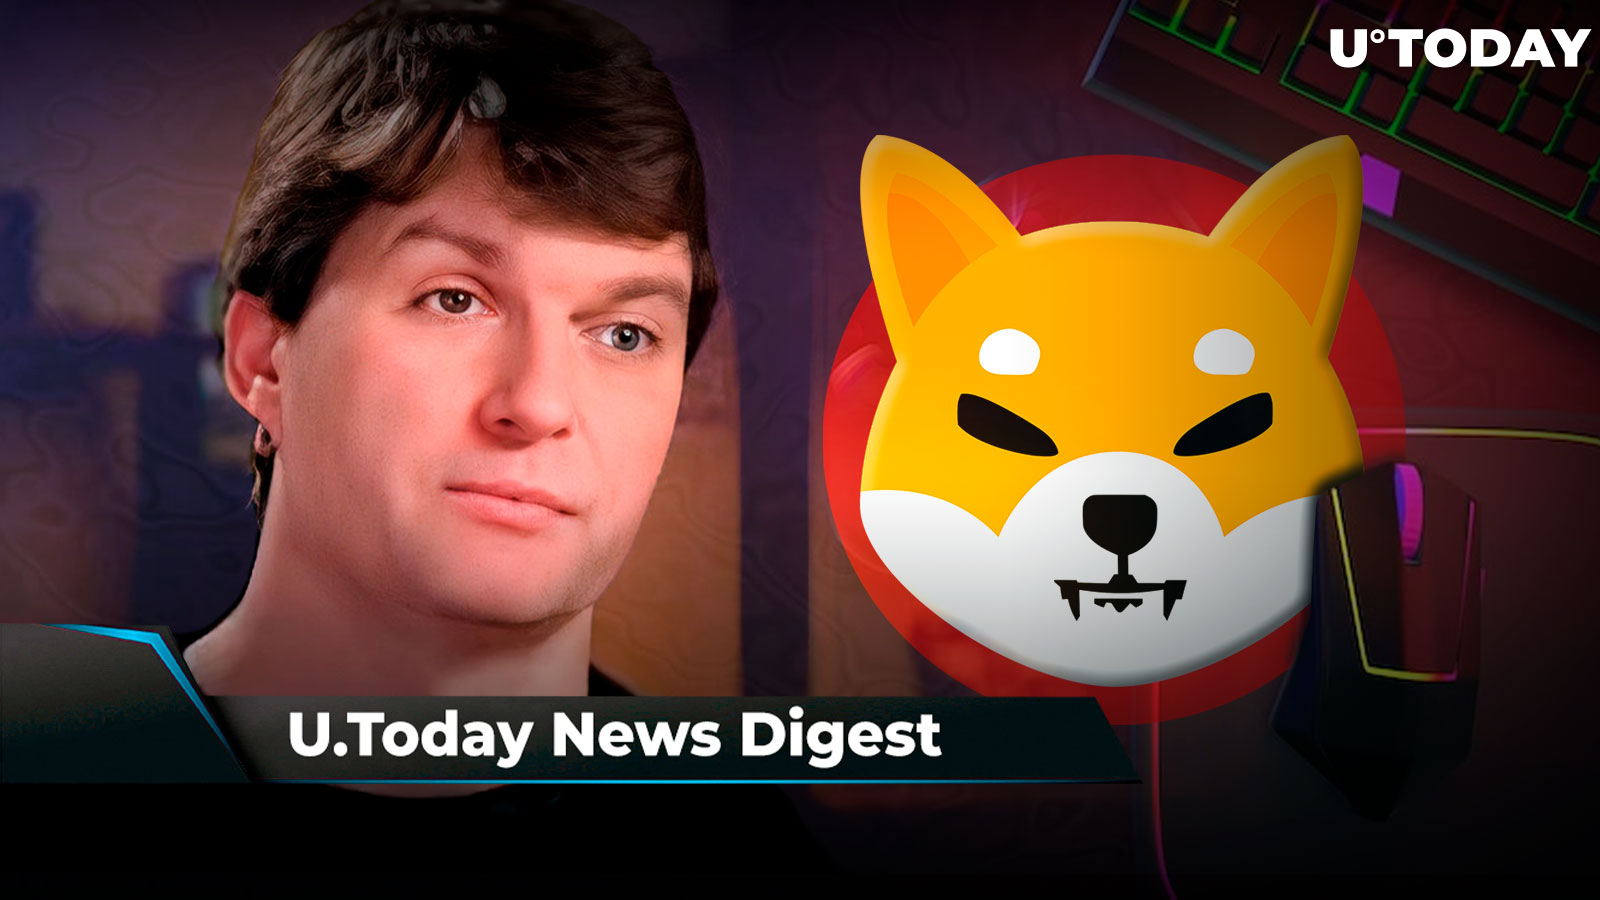 New SHIB Game Rocks in Vietnam, XRP Classified as “Digital Currency” by Goldman Sachs, “Big Short” Michael Burry Exits All Markets: Crypto News Digest by U.Today